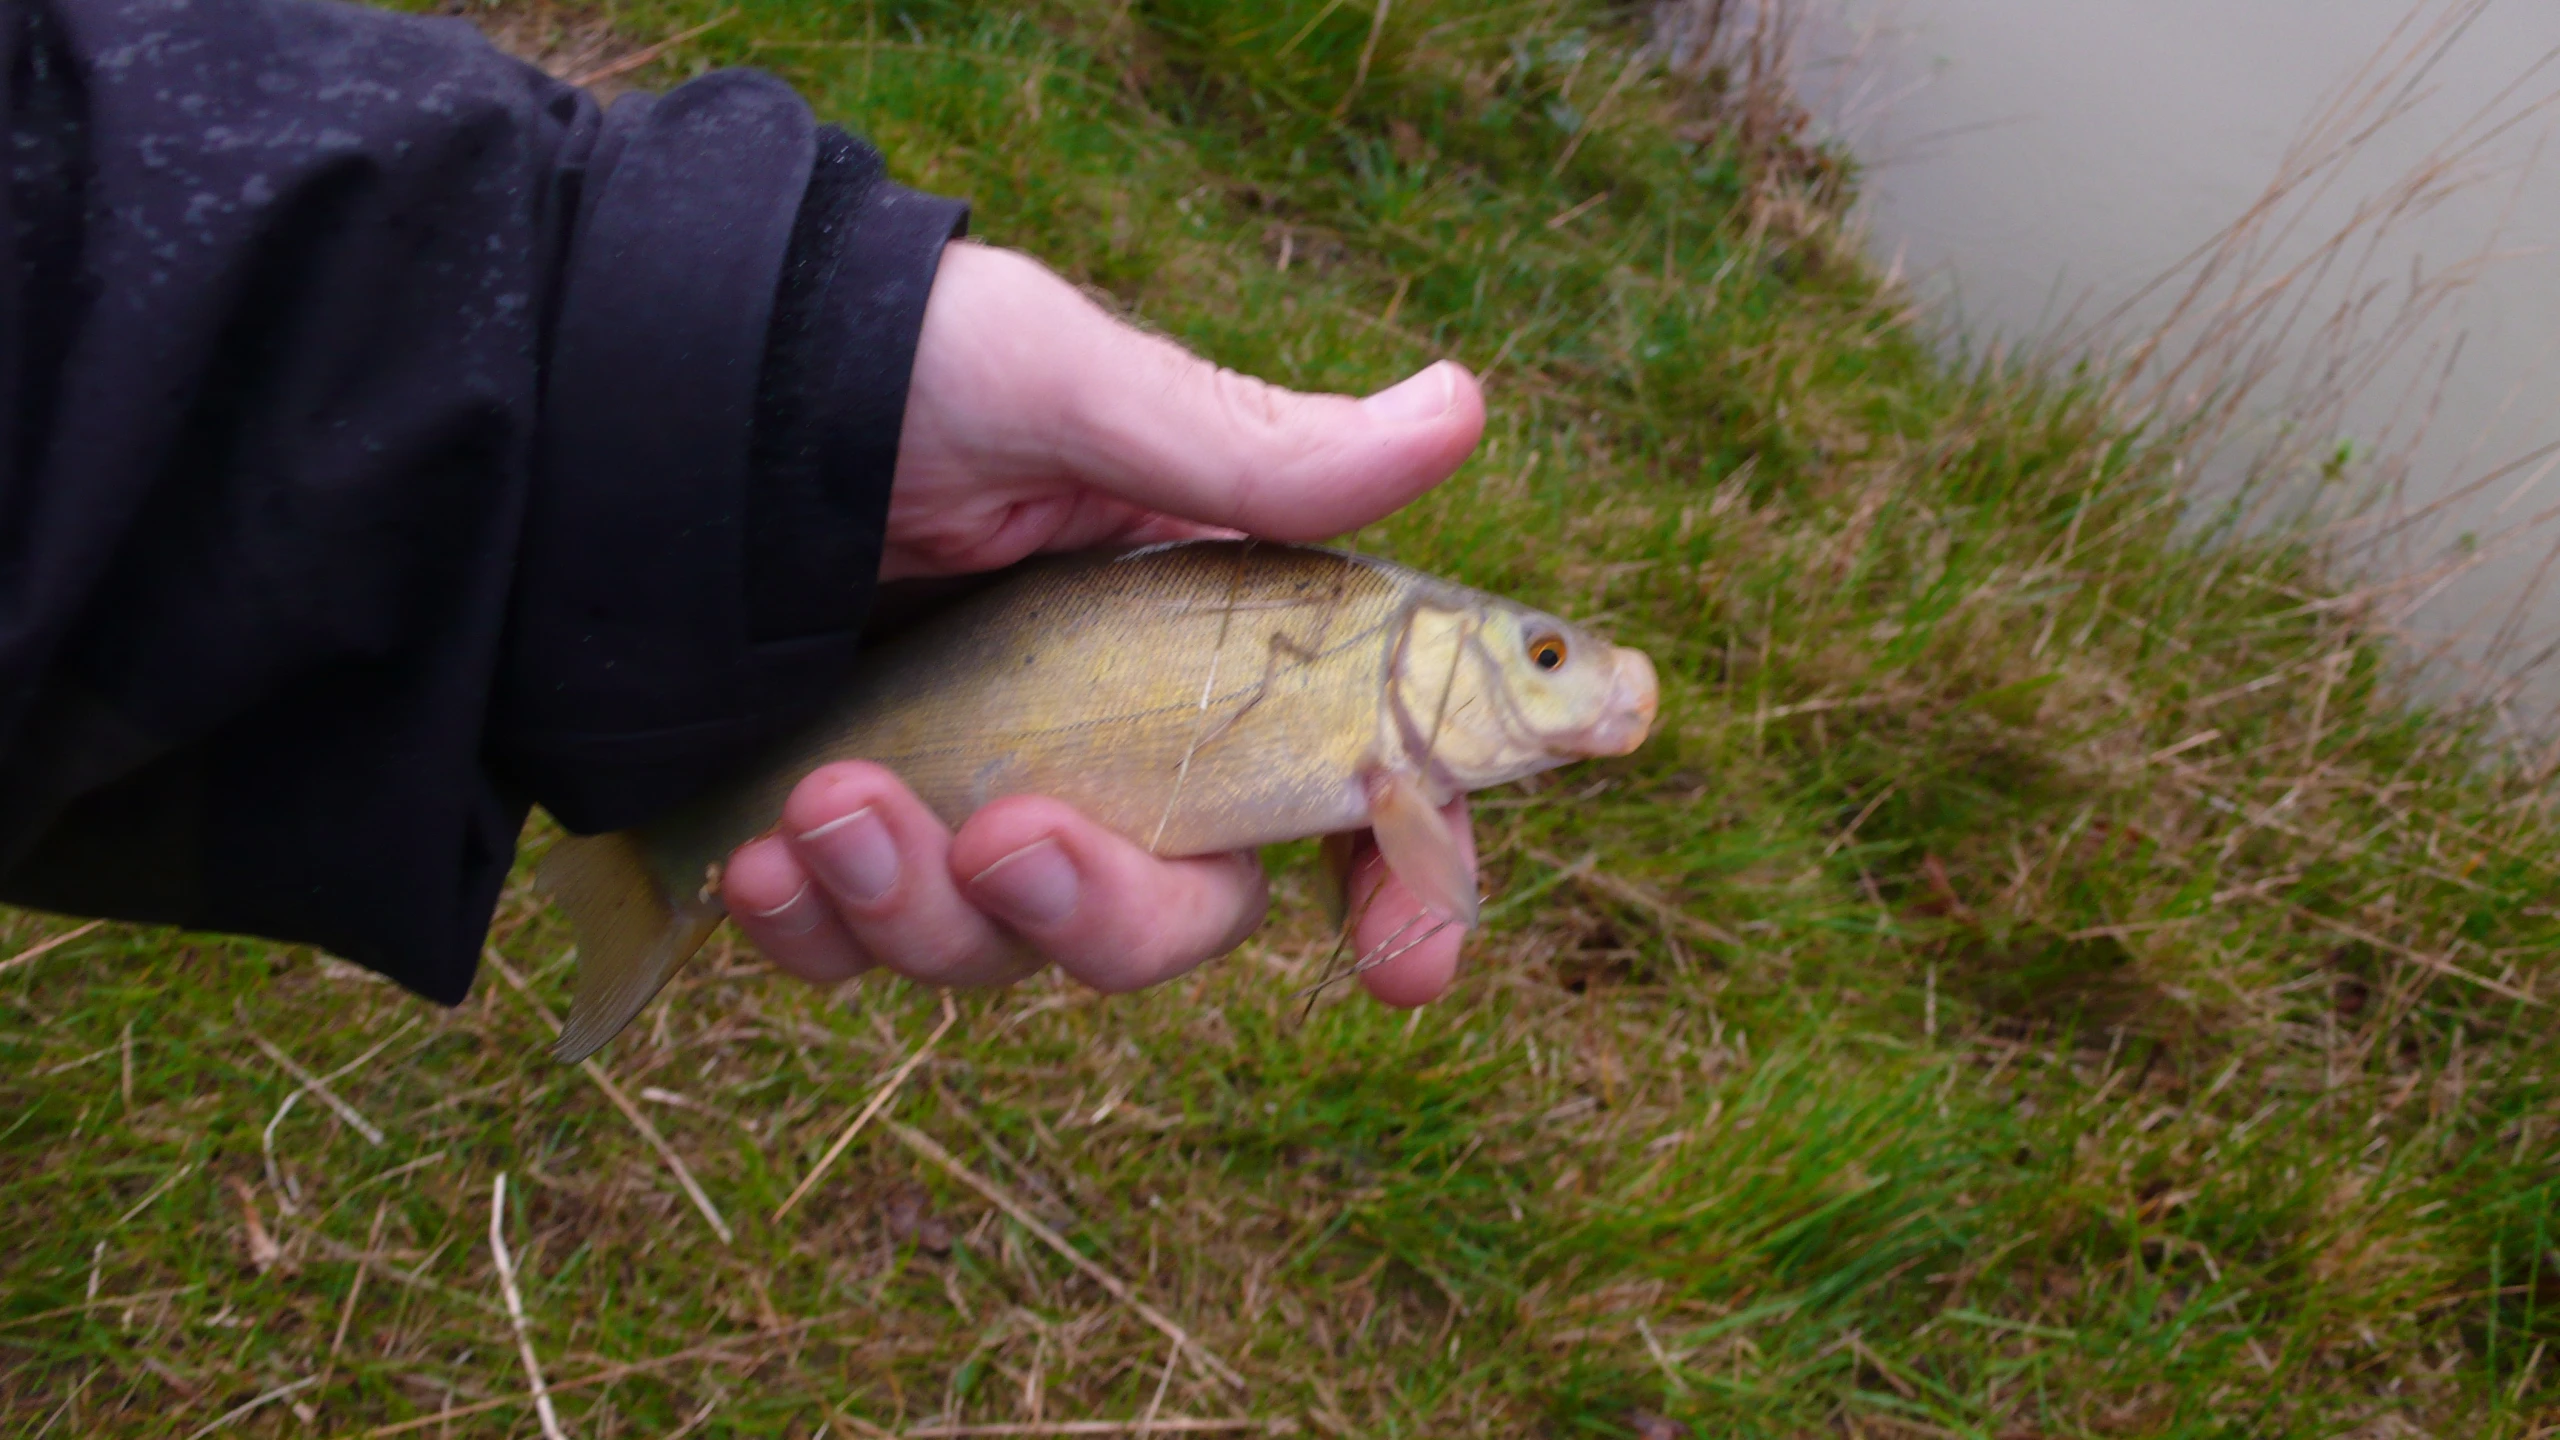 a fish in someone's hand near grass